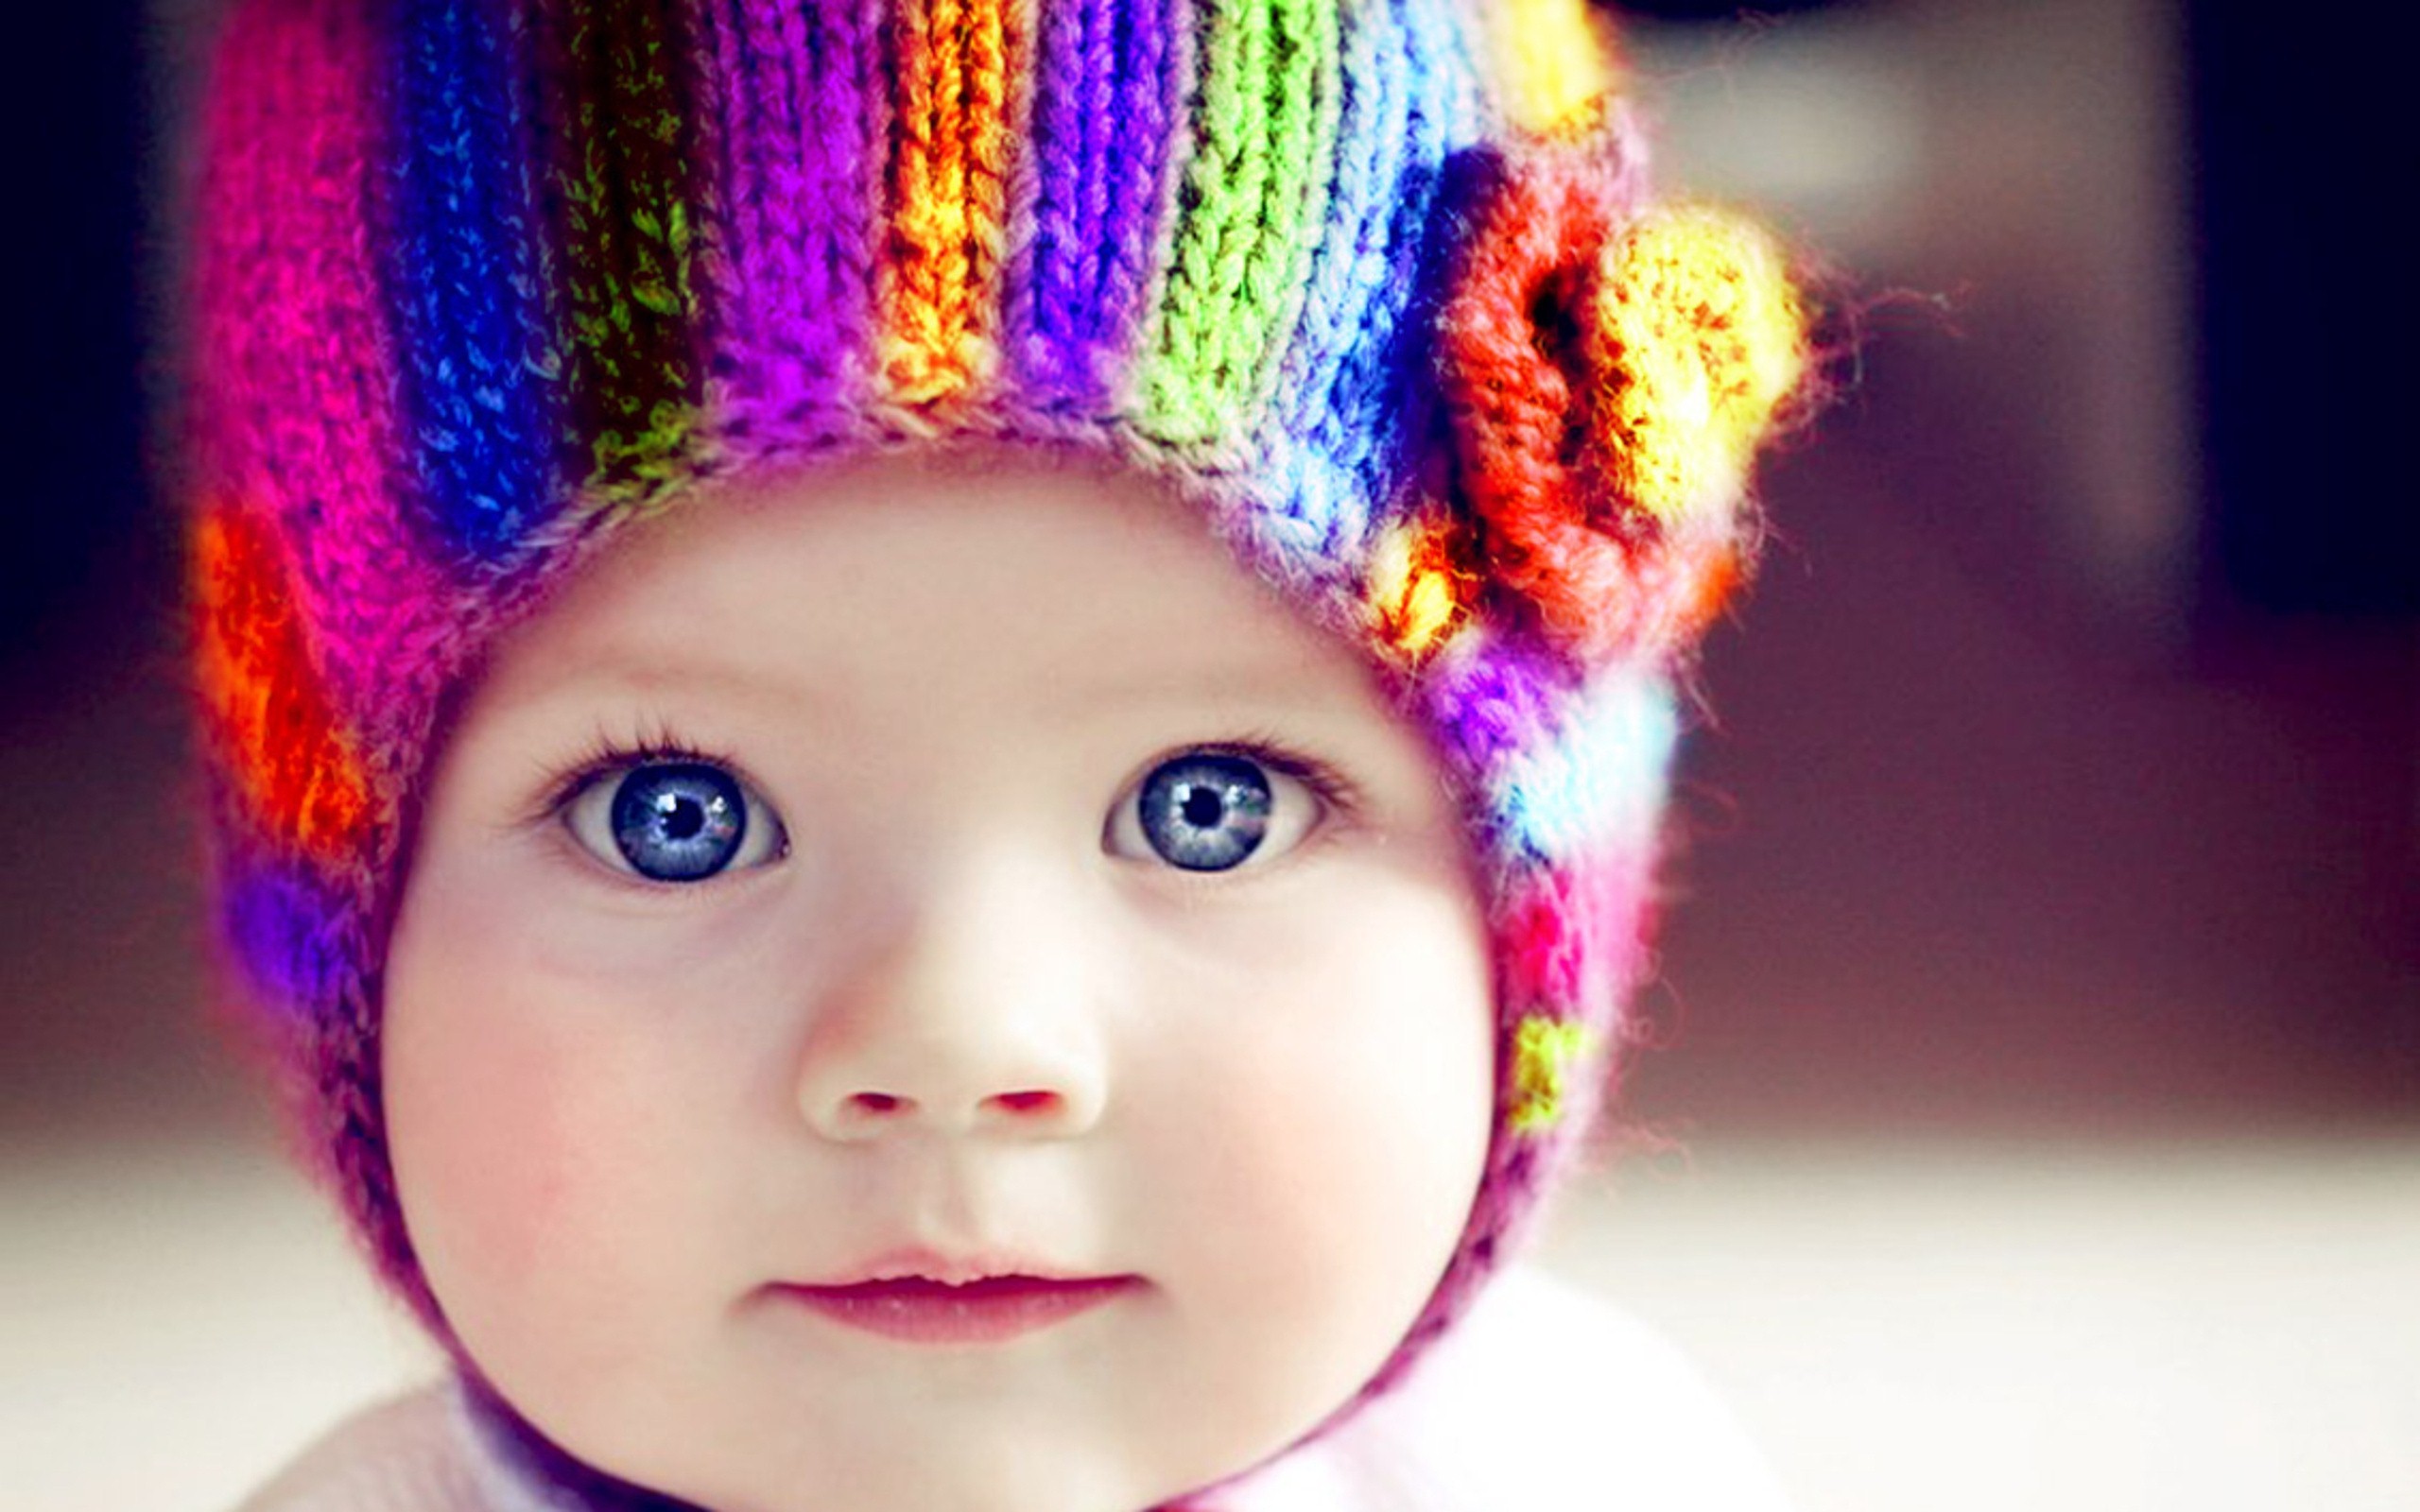 Baby With Rainbow Eyes - HD Wallpaper 